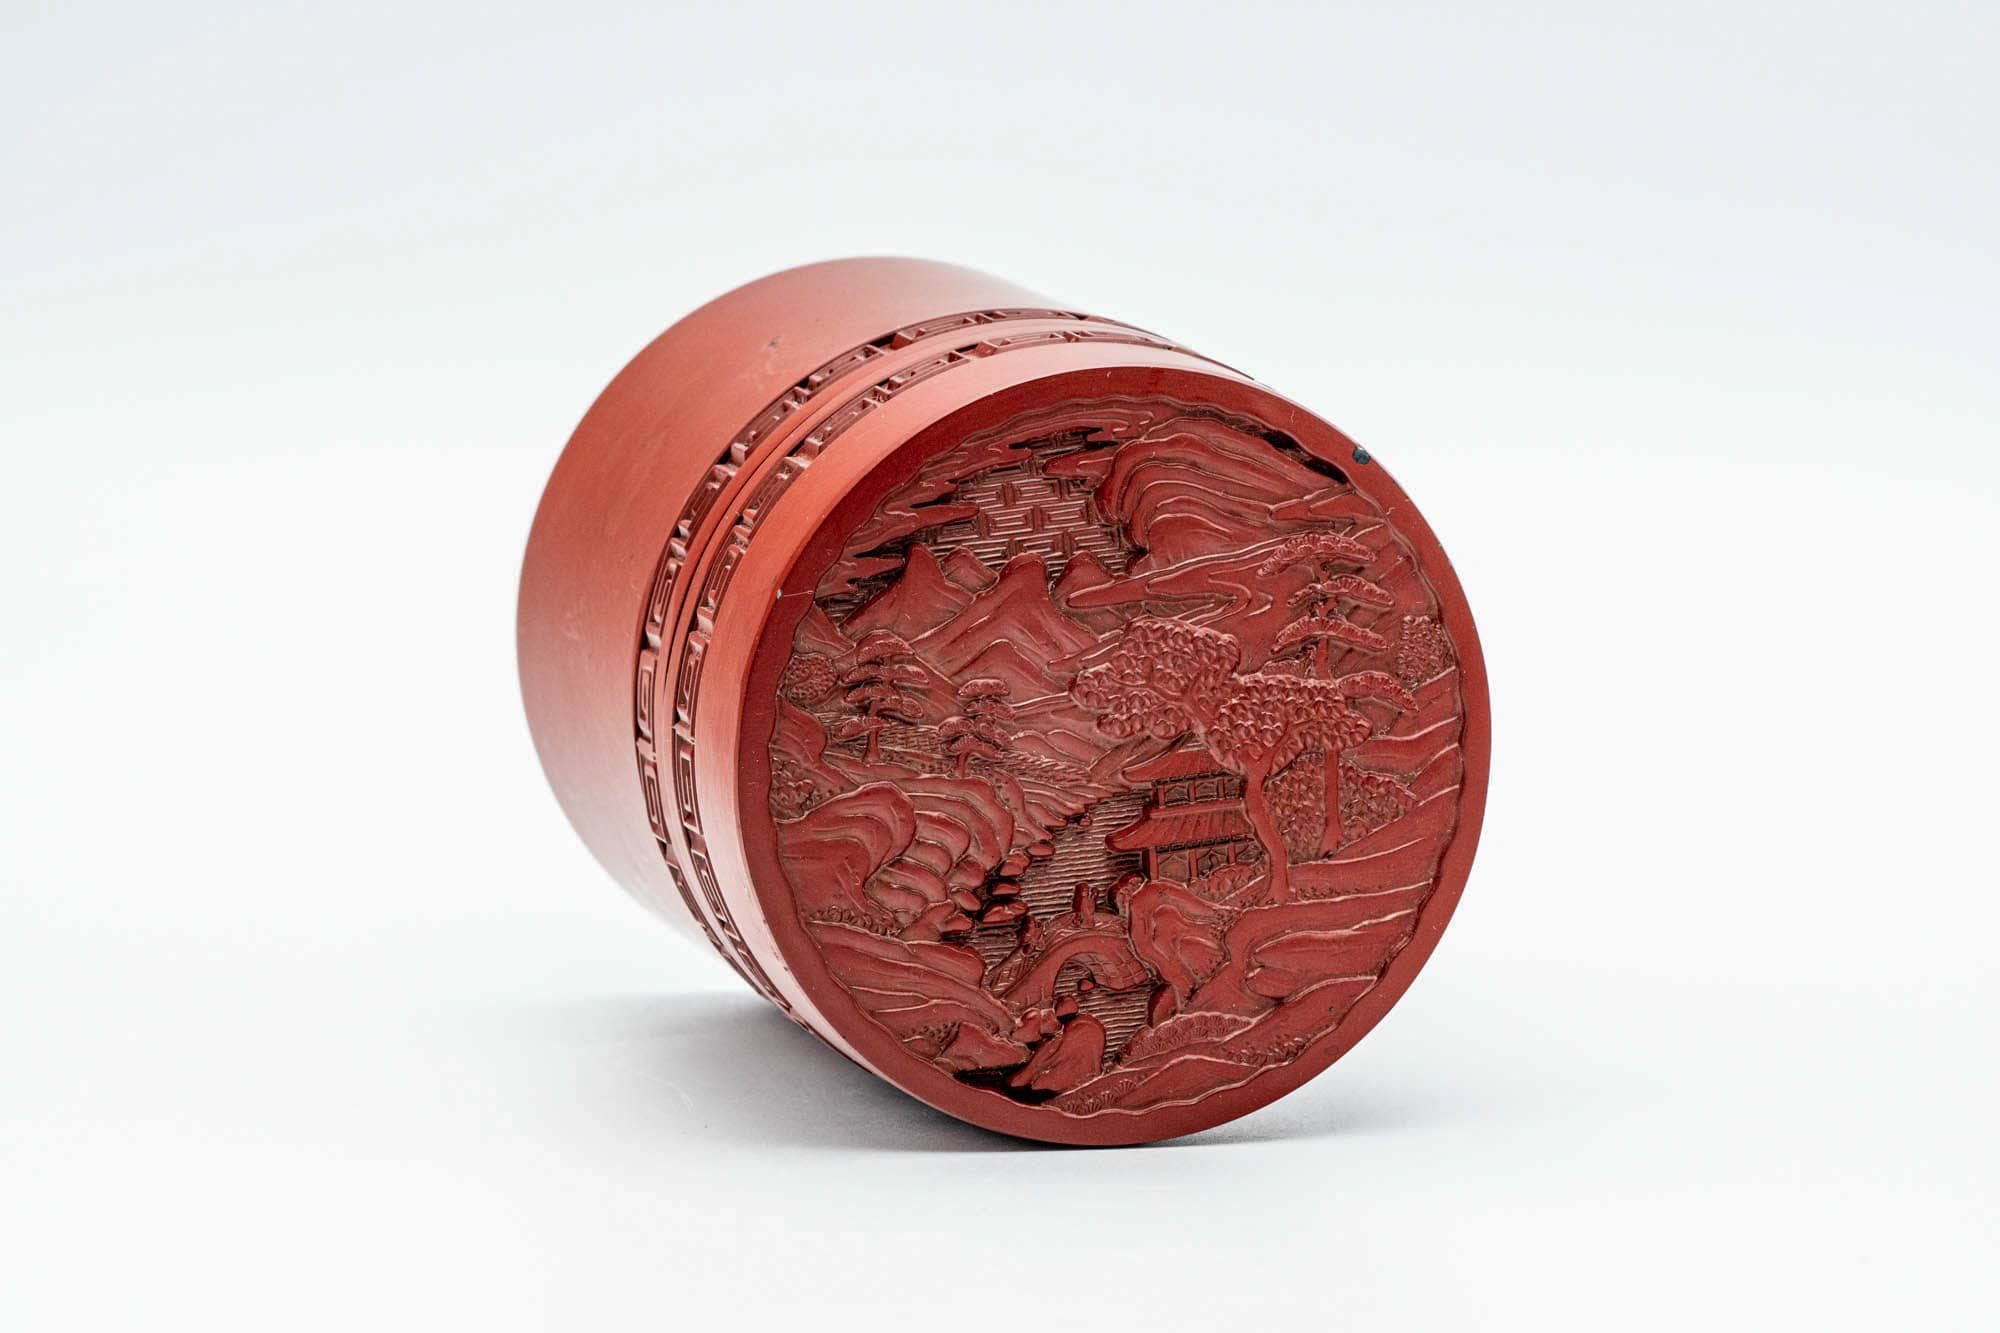 Japanese Chazutsu - Village Landscape Engraved Red Lacquer Tea Canister - 300ml